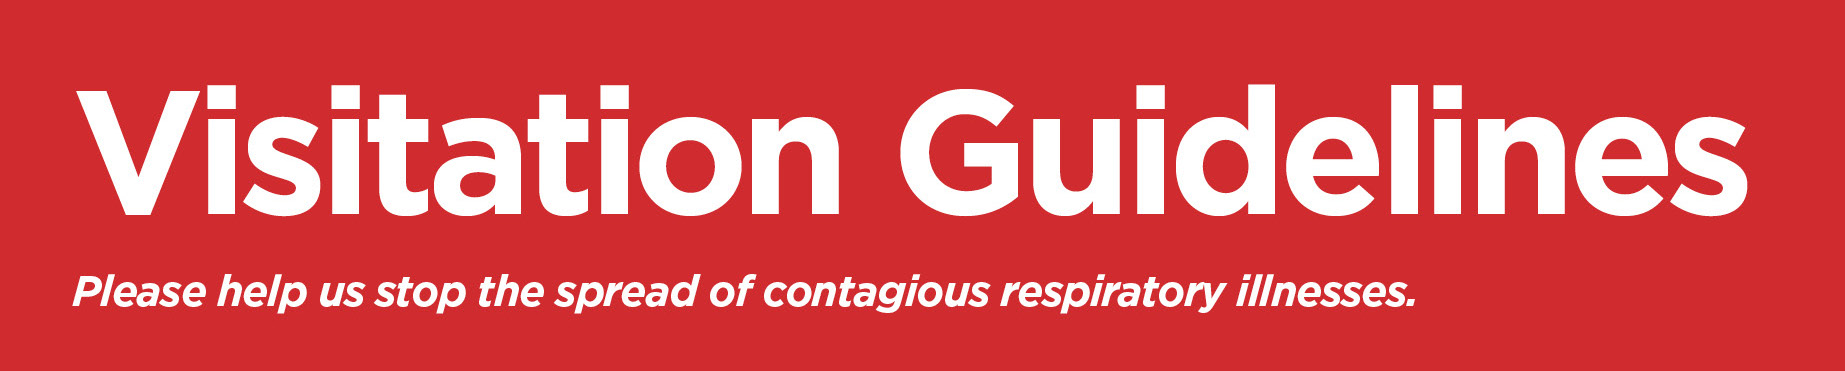 White text on red background reading visitation guidelines: please help us stop the spread of contagious respiratory illnesses